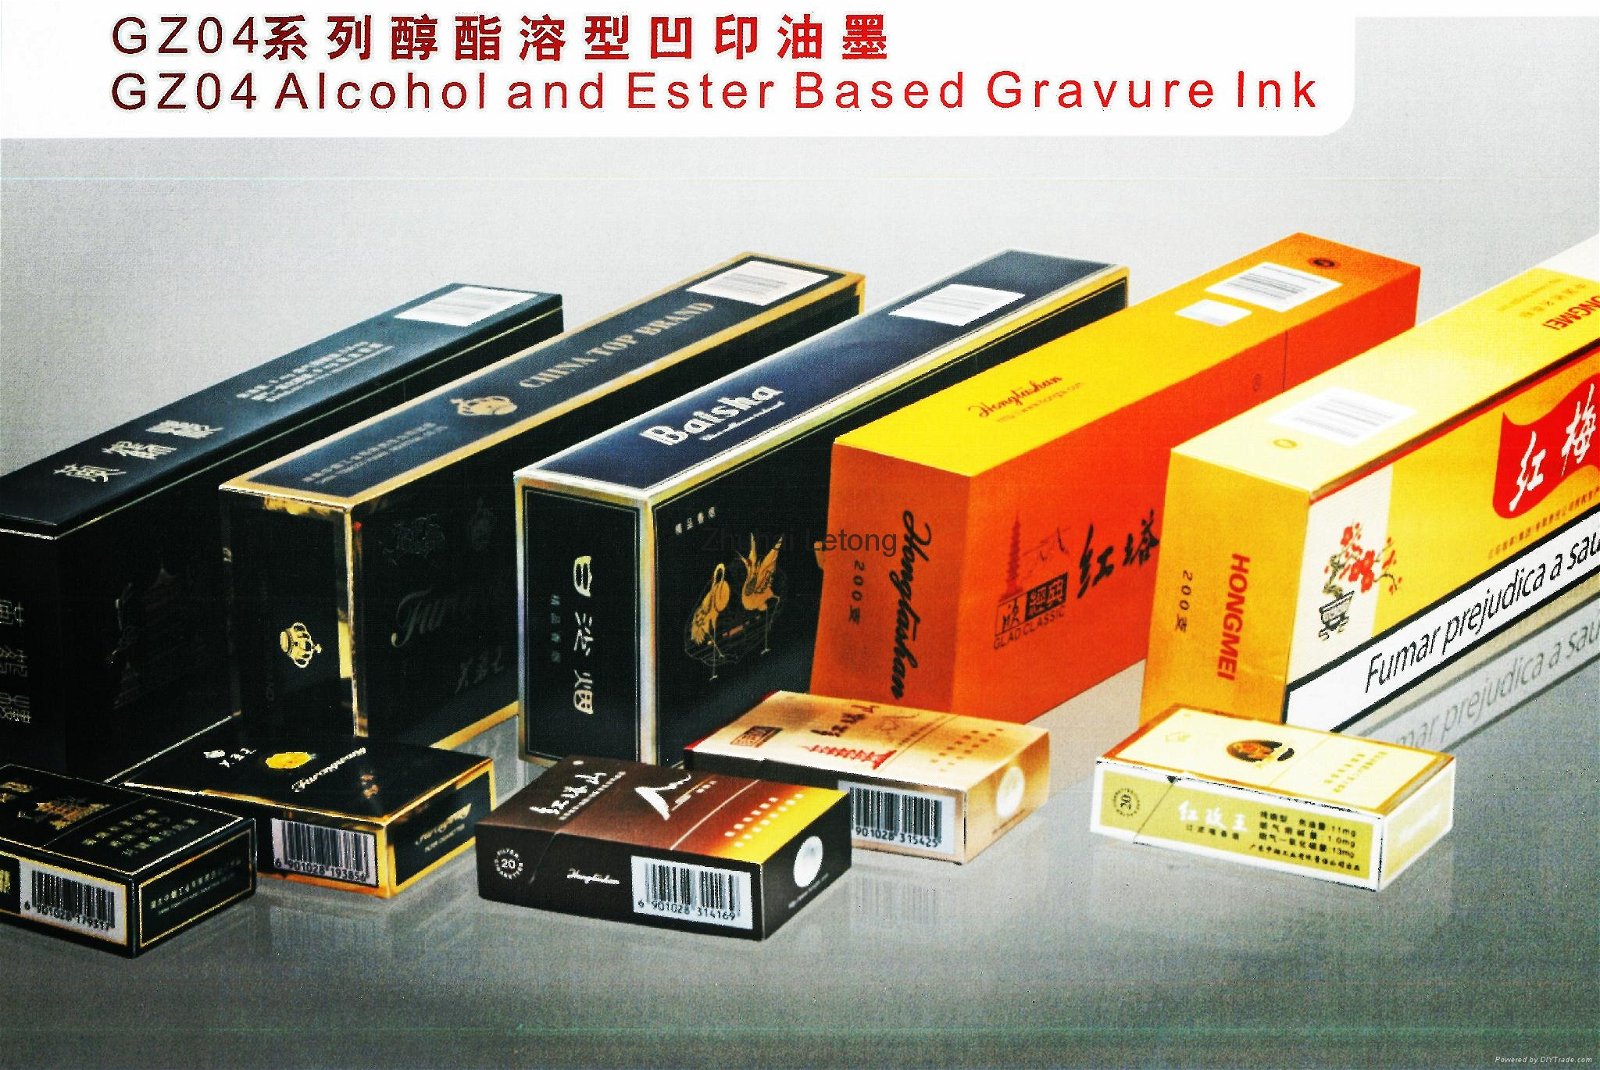 Alcohol and Ester Based Gravure Ink